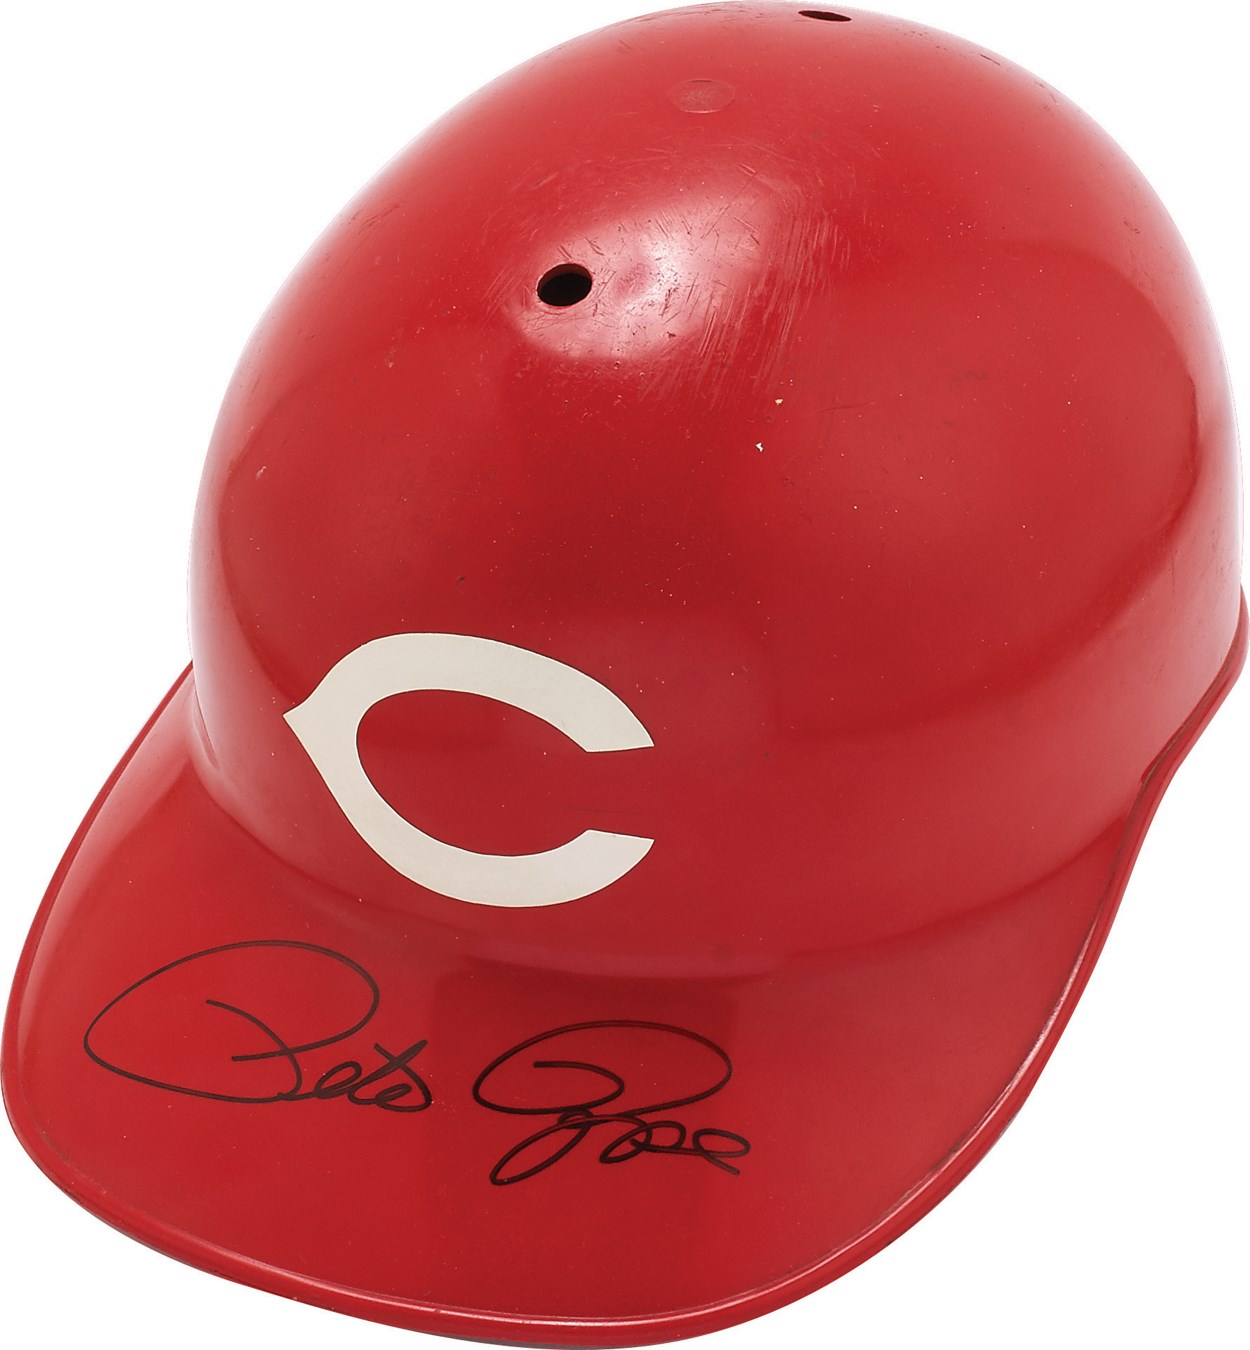 - 1970s Pete Rose Autographed Game Worn Reds Helmet with Repair